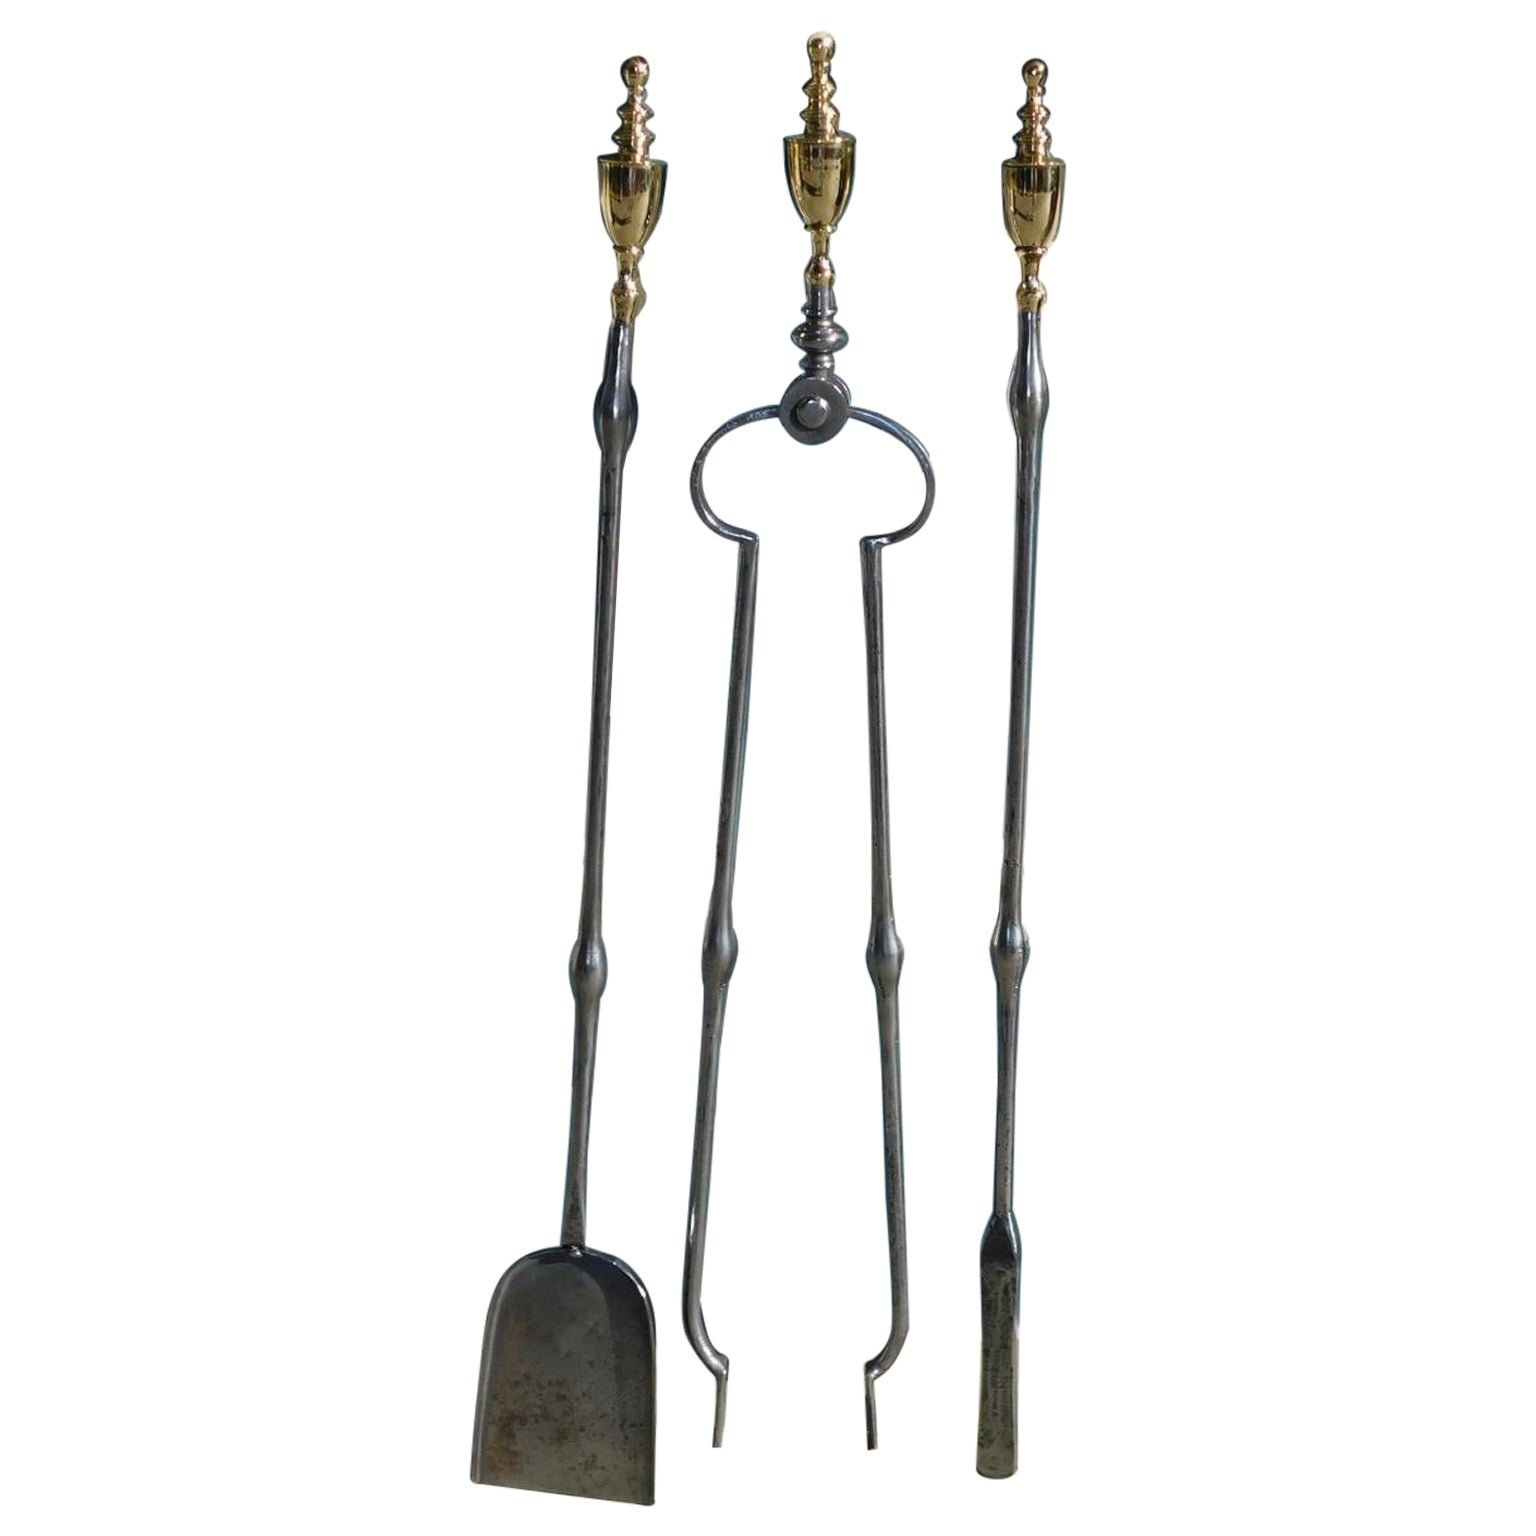 Set of American Brass and Polished Steel Urn Finial Bulbous Fire Tools, C. 1810 For Sale